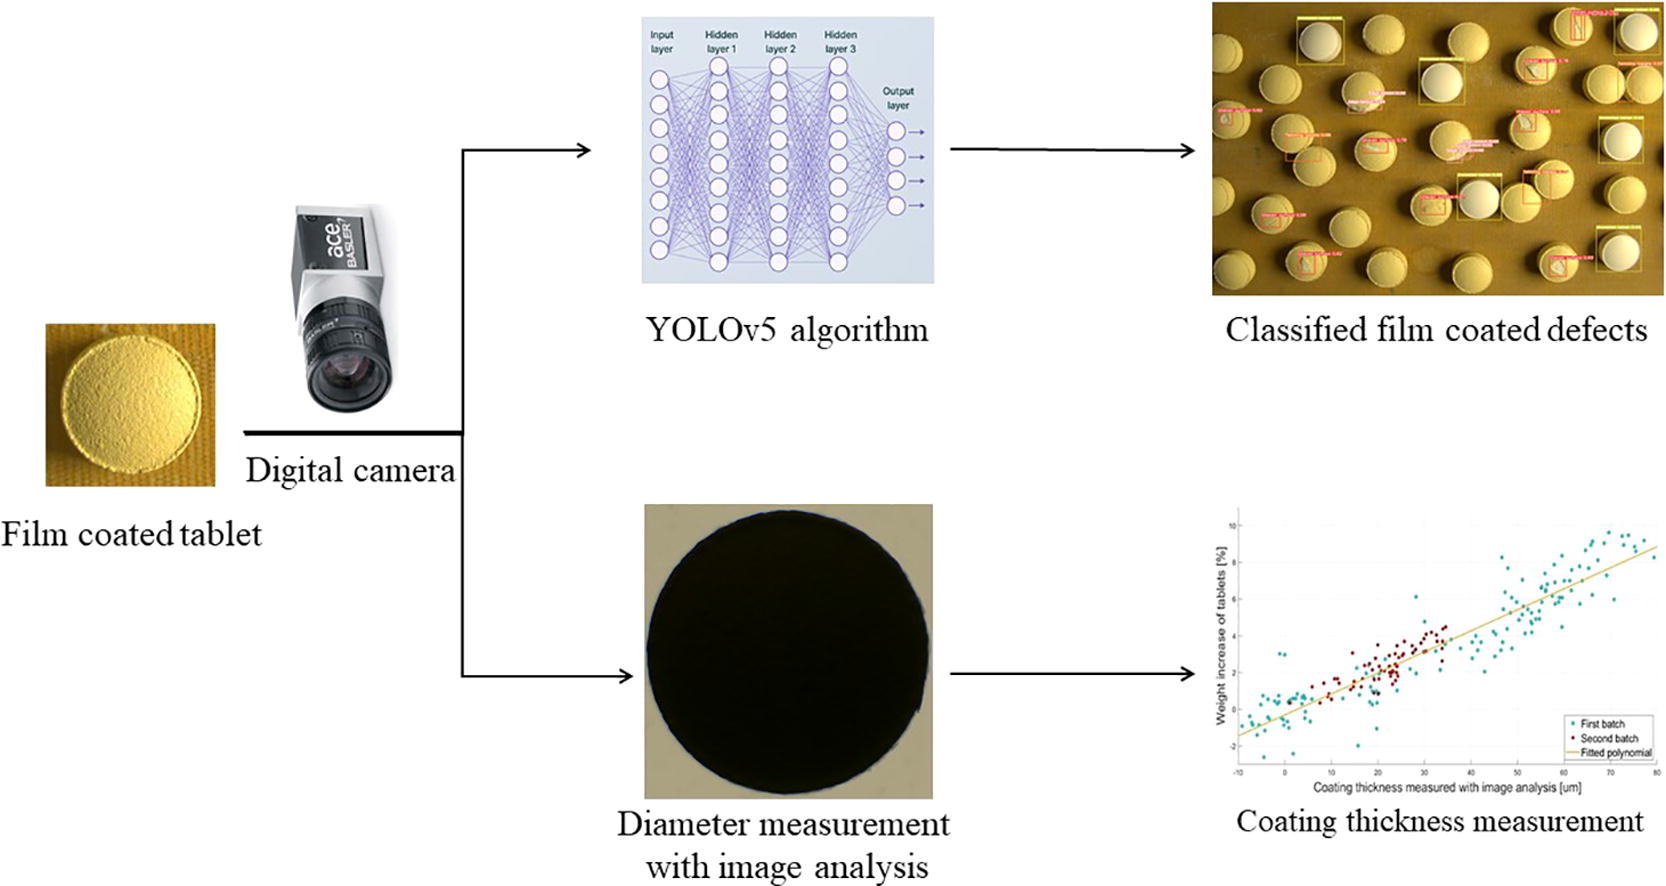 Real-time coating thickness measurement and defect recognition of film coated tablets with machine vision and deep learning